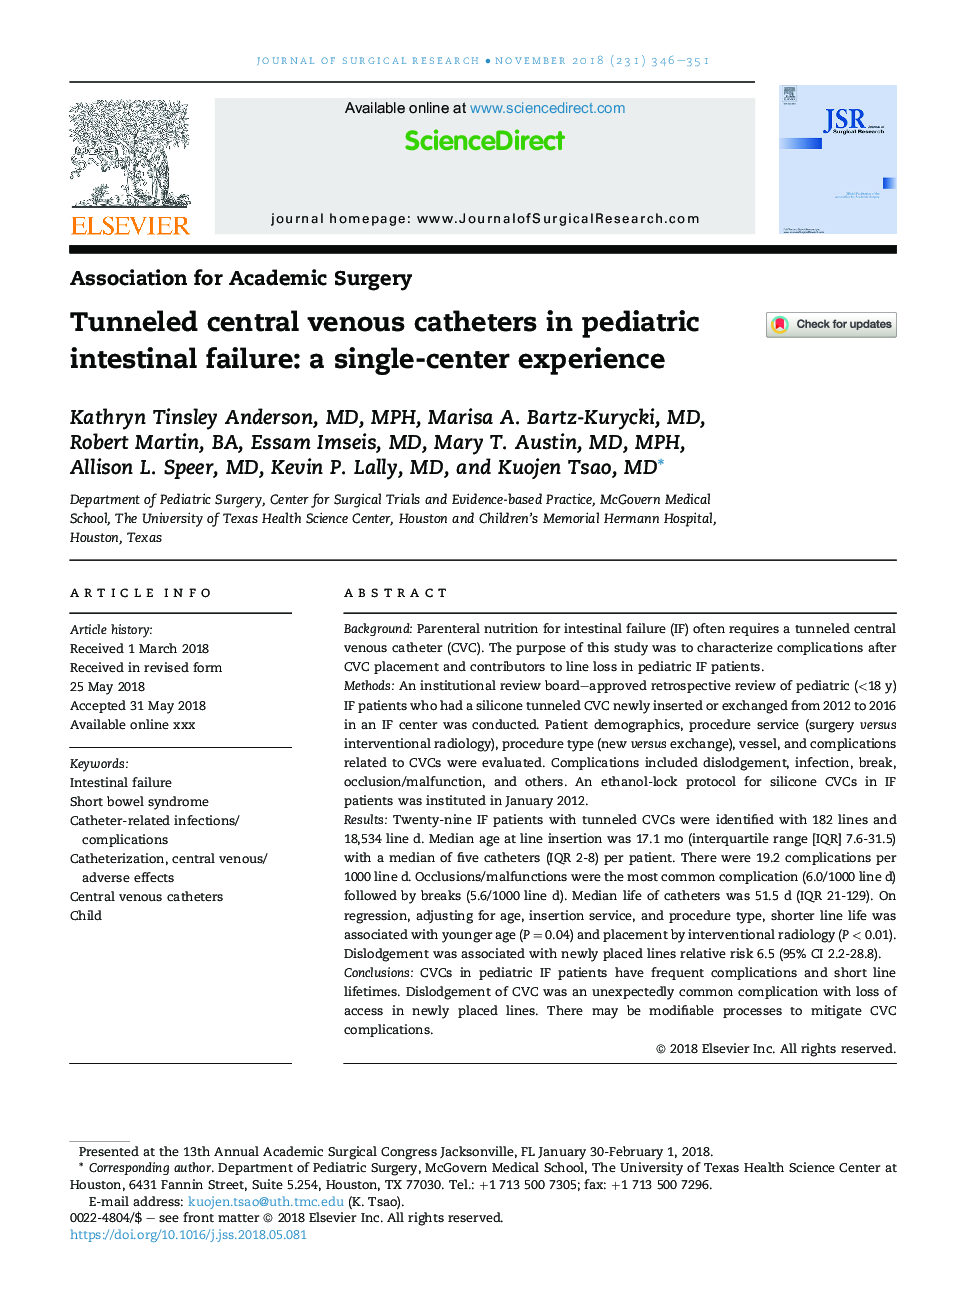 Tunneled central venous catheters in pediatric intestinal failure: a single-center experience